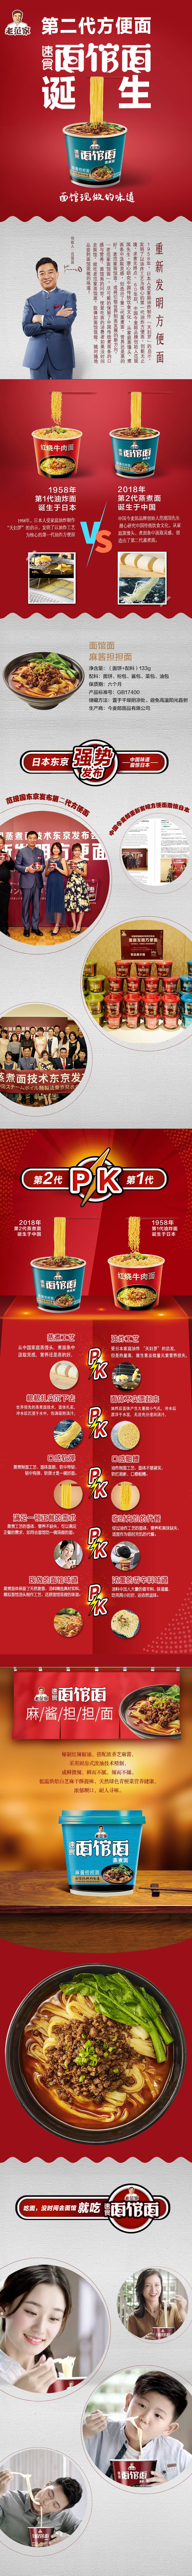 Sichuan noodles with peppery sauce and sesame paste 133gx2